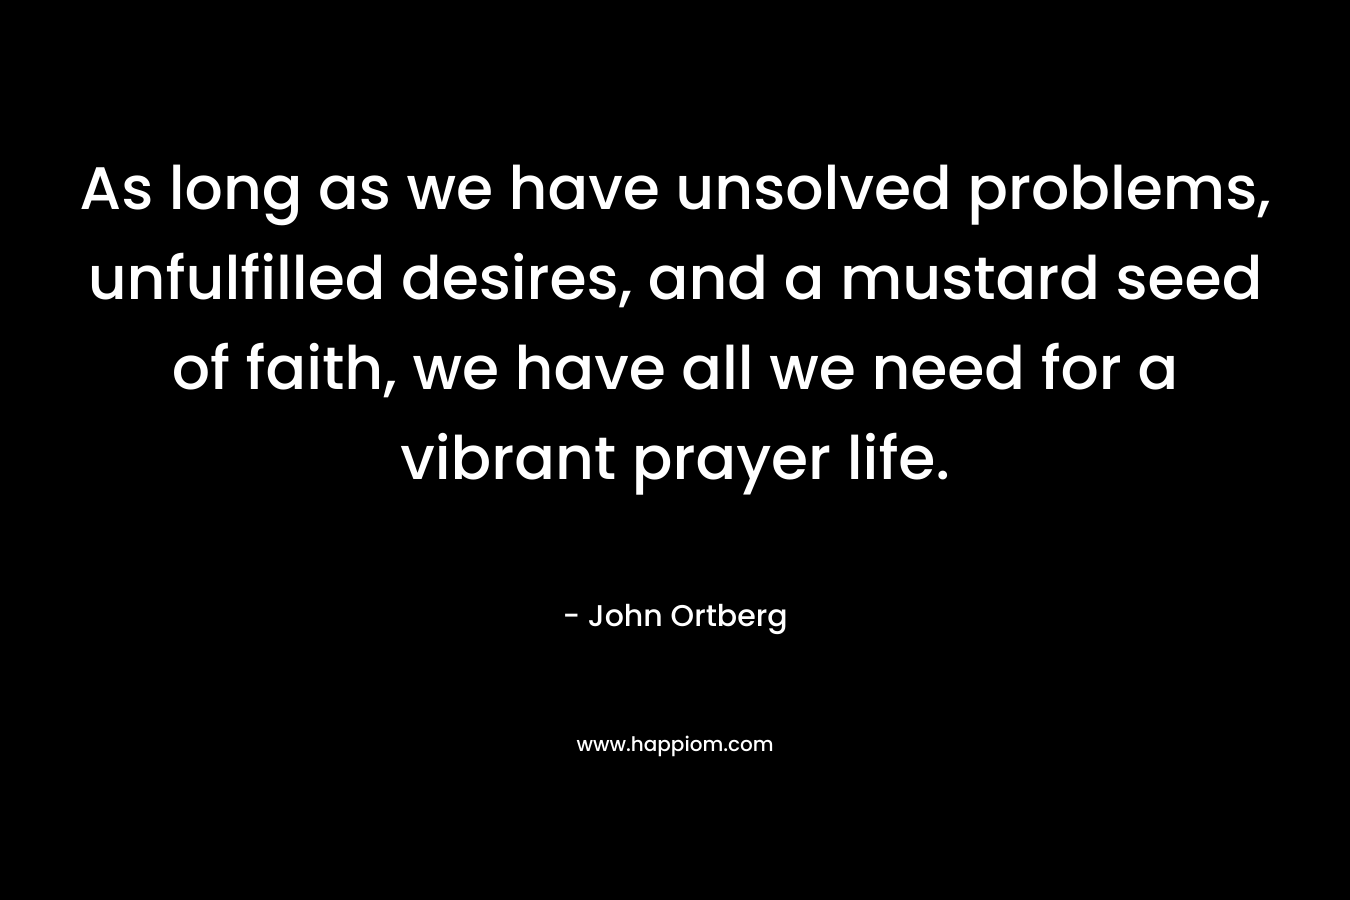 As long as we have unsolved problems, unfulfilled desires, and a mustard seed of faith, we have all we need for a vibrant prayer life.